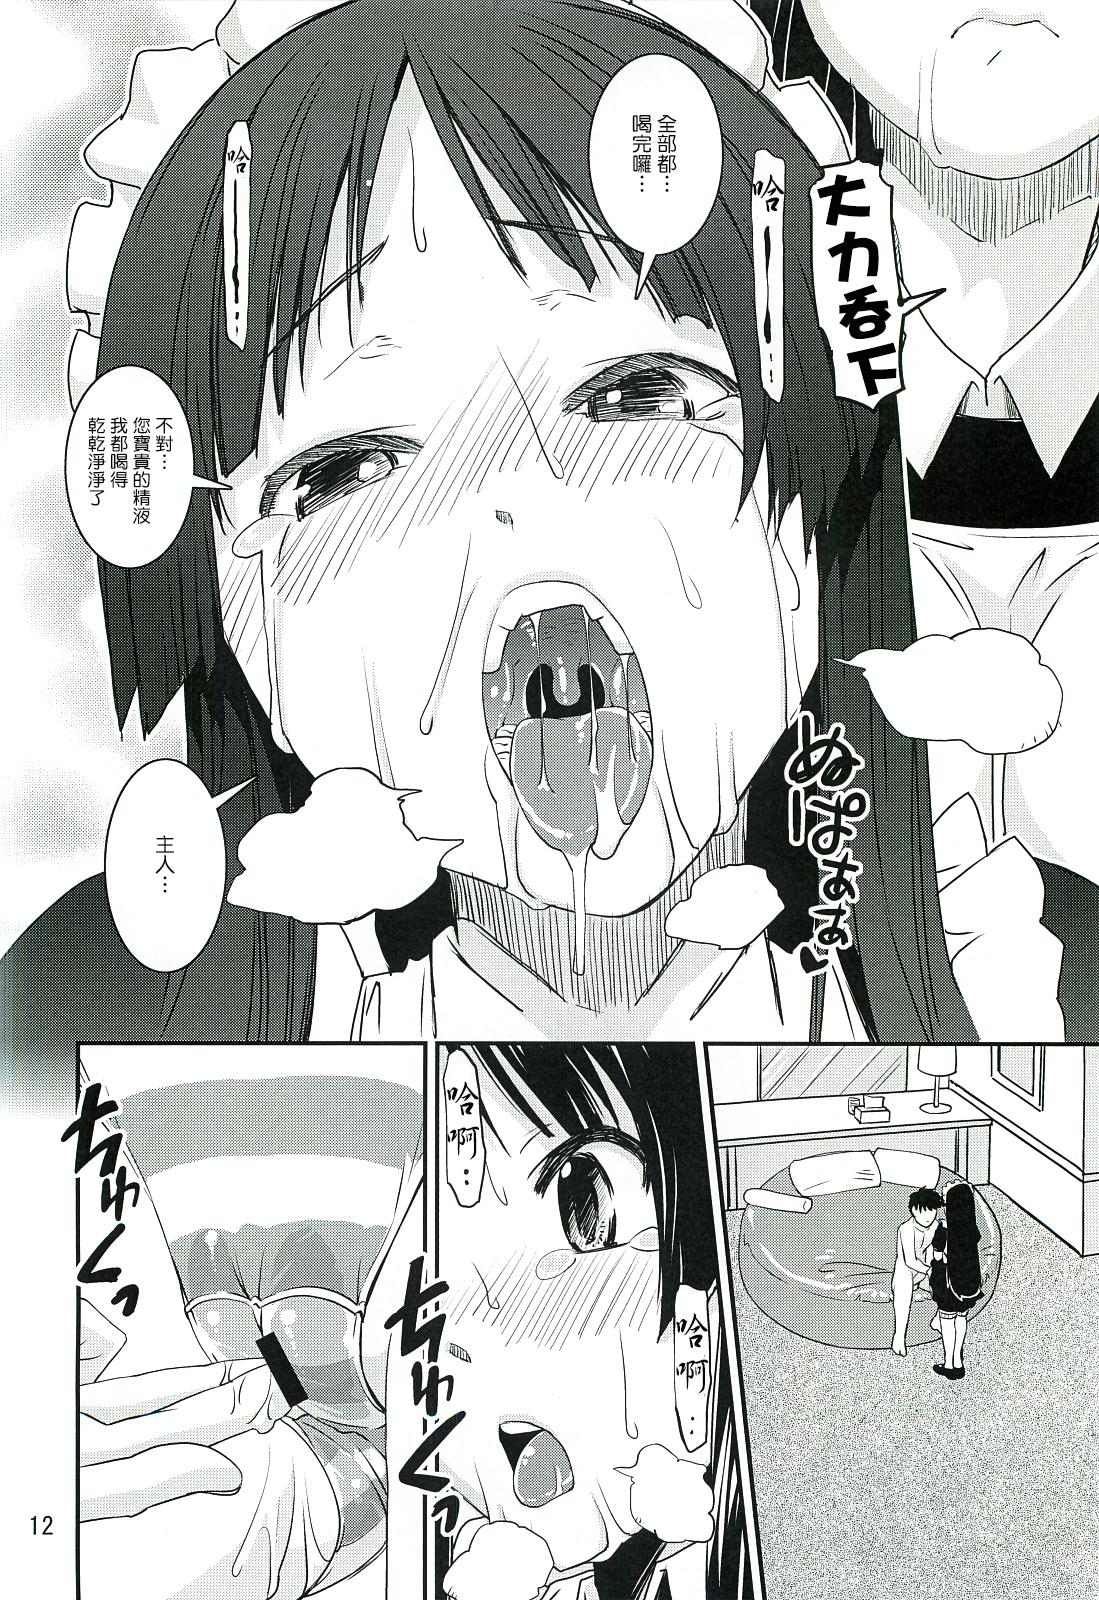 Passion Mio Dyukushi!!! 3 - K-on Fetiche - Page 11